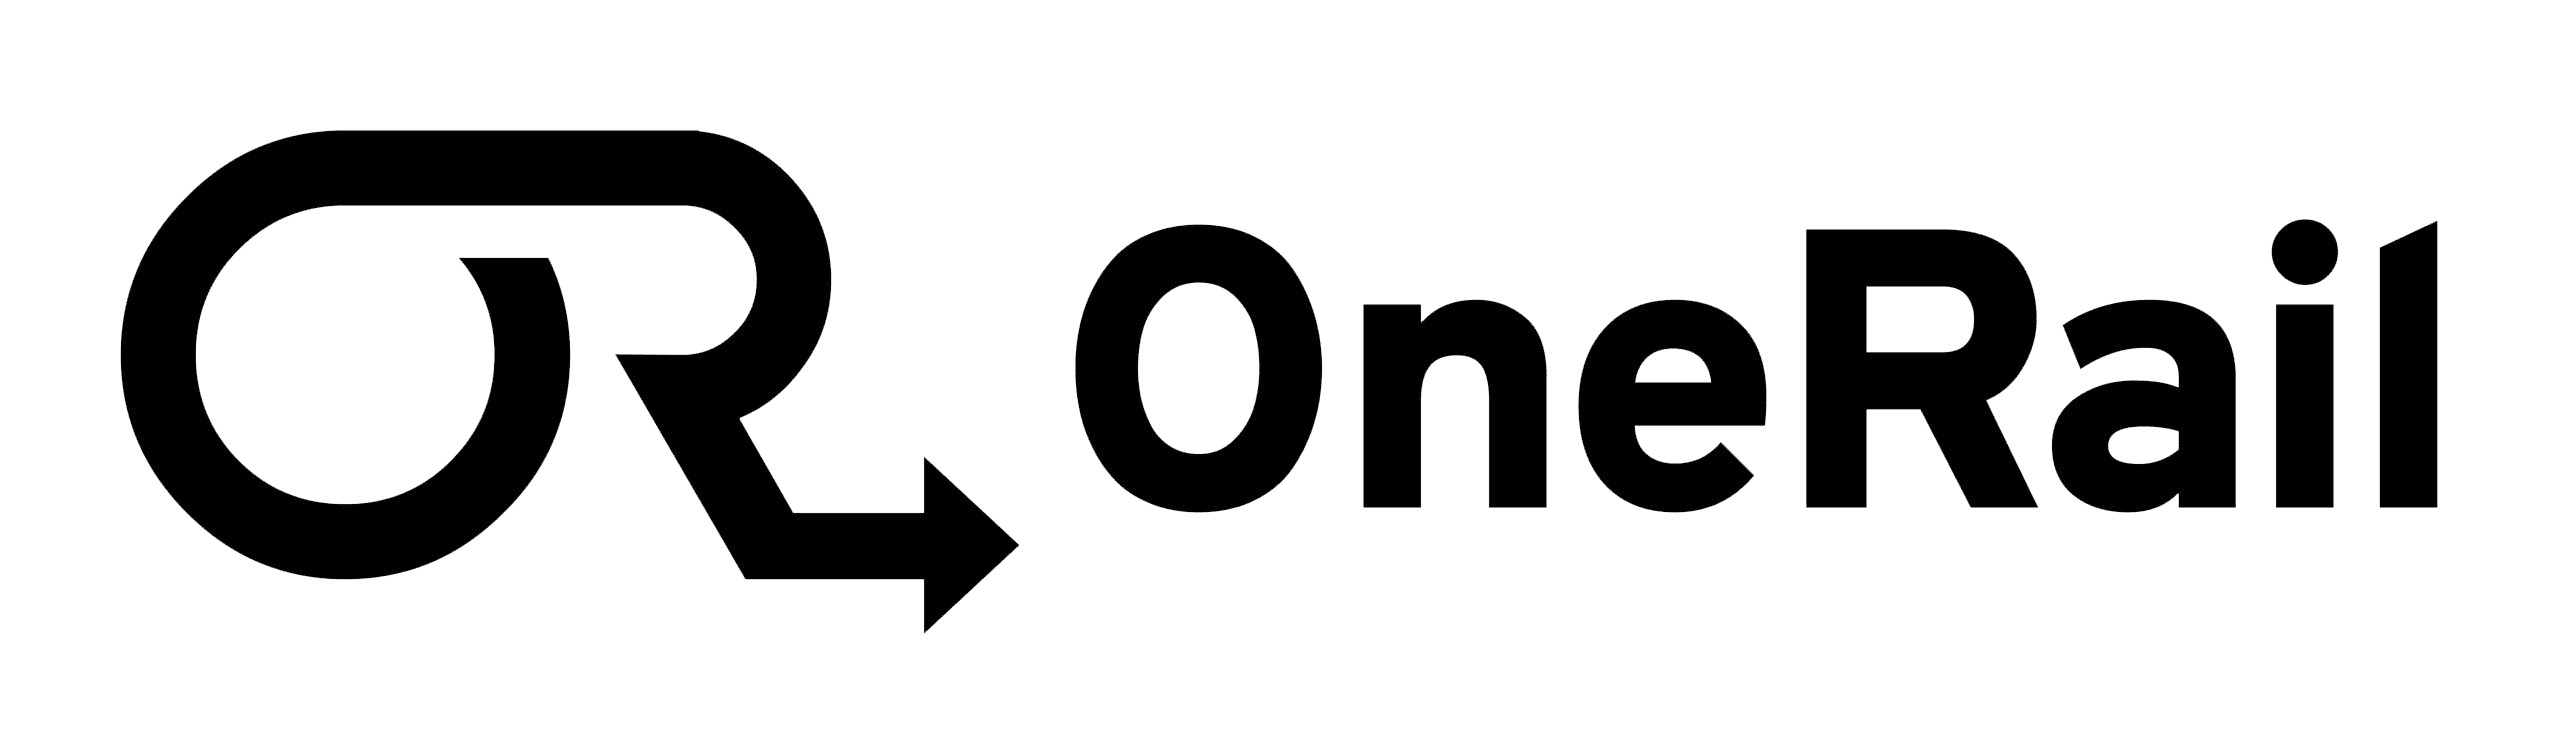 Logo of OneRail. The logo features the text "OneRail" in a modern sans-serif font. To the left of the text is an abstract design resembling the letters "O" and "R" combined, with an arrow pointing down and to the left, symbolizing a customized solution for efficient operations. CodersLink 2024.